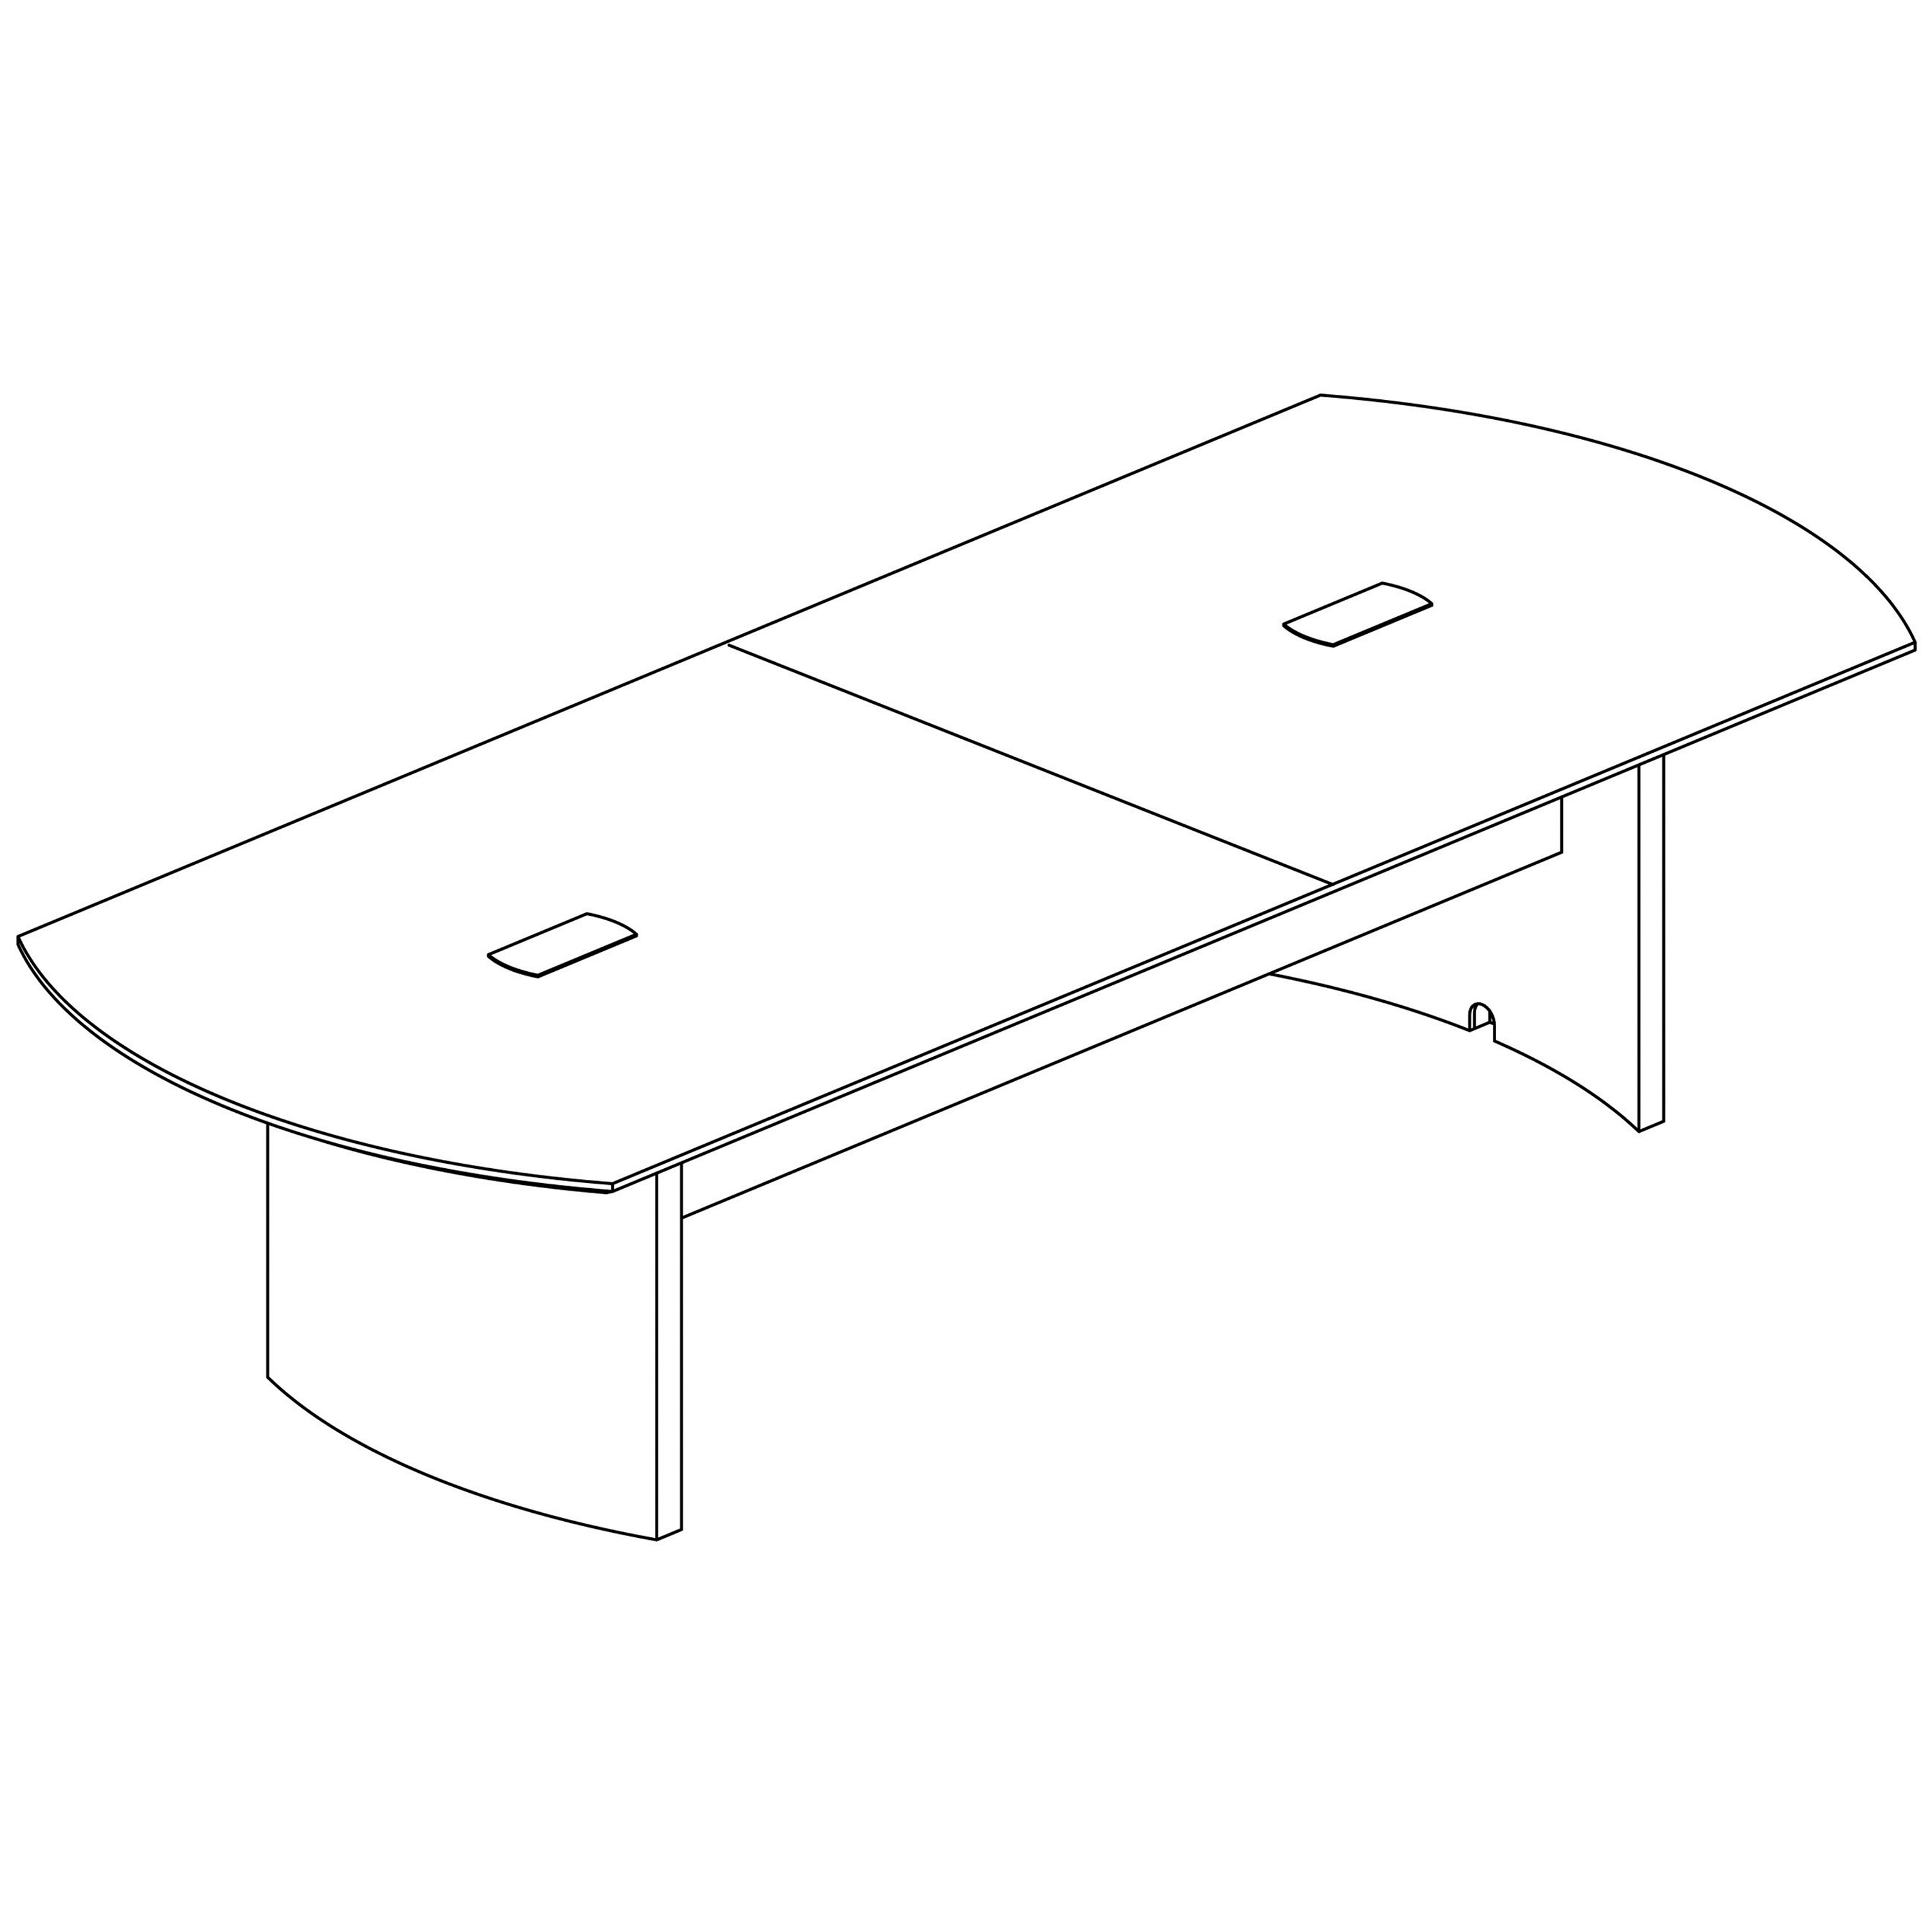 Table Top Drawing at GetDrawings Free download